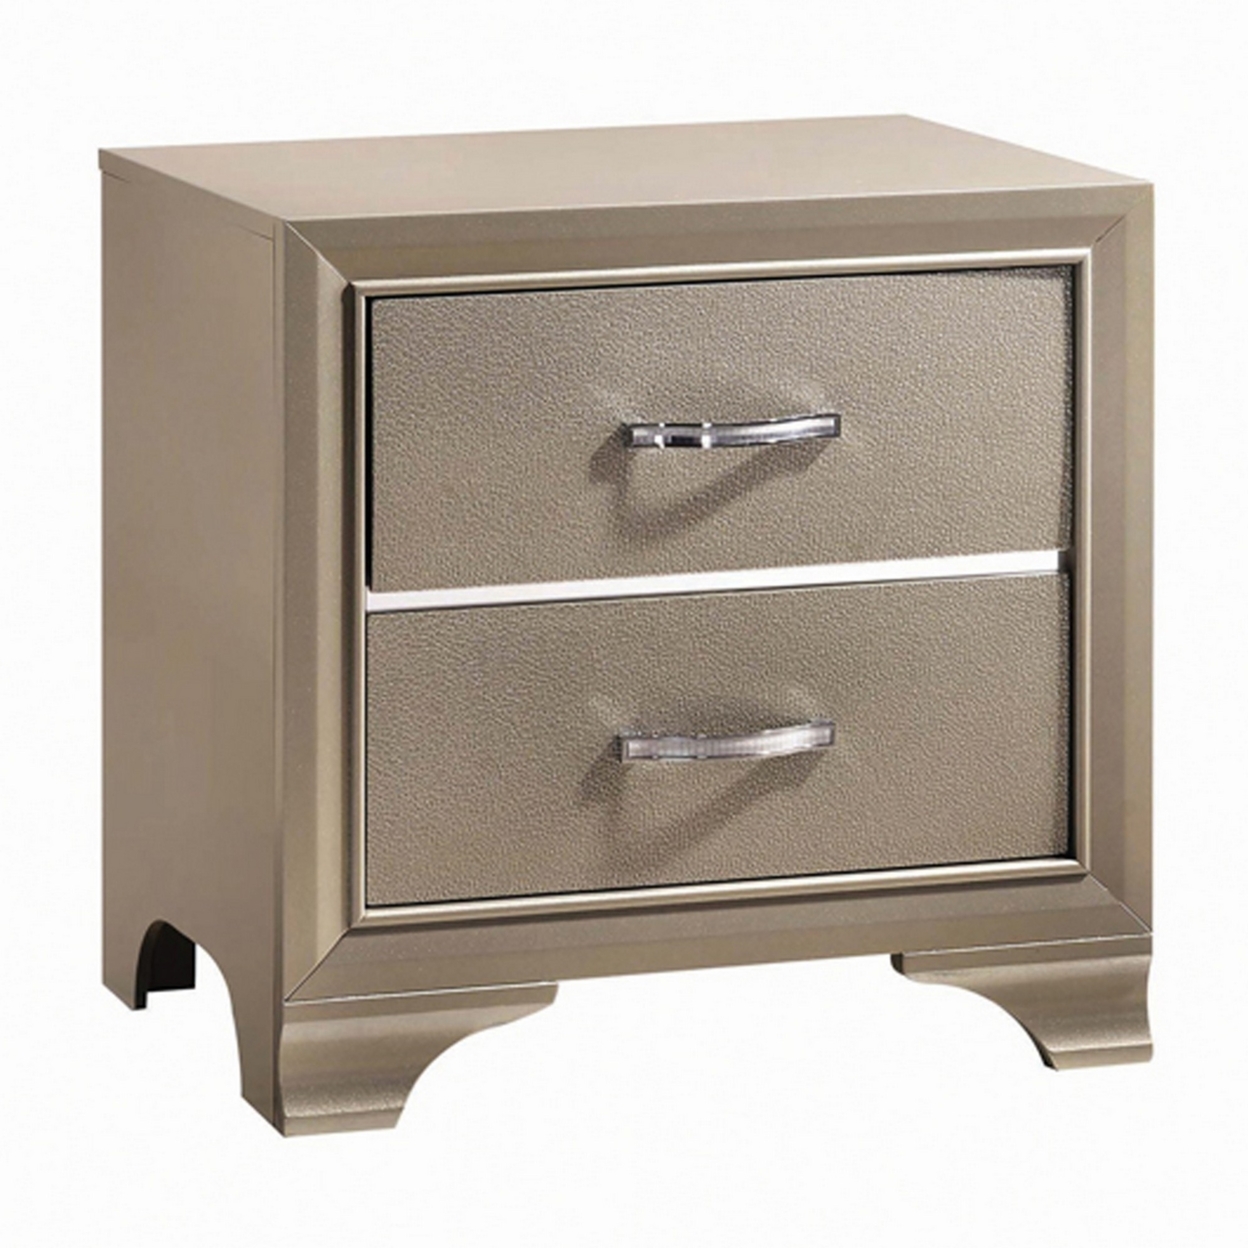 2 Drawers Contemporary Nightstand With Mirror Accents And Metal Pull,Silver- Saltoro Sherpi